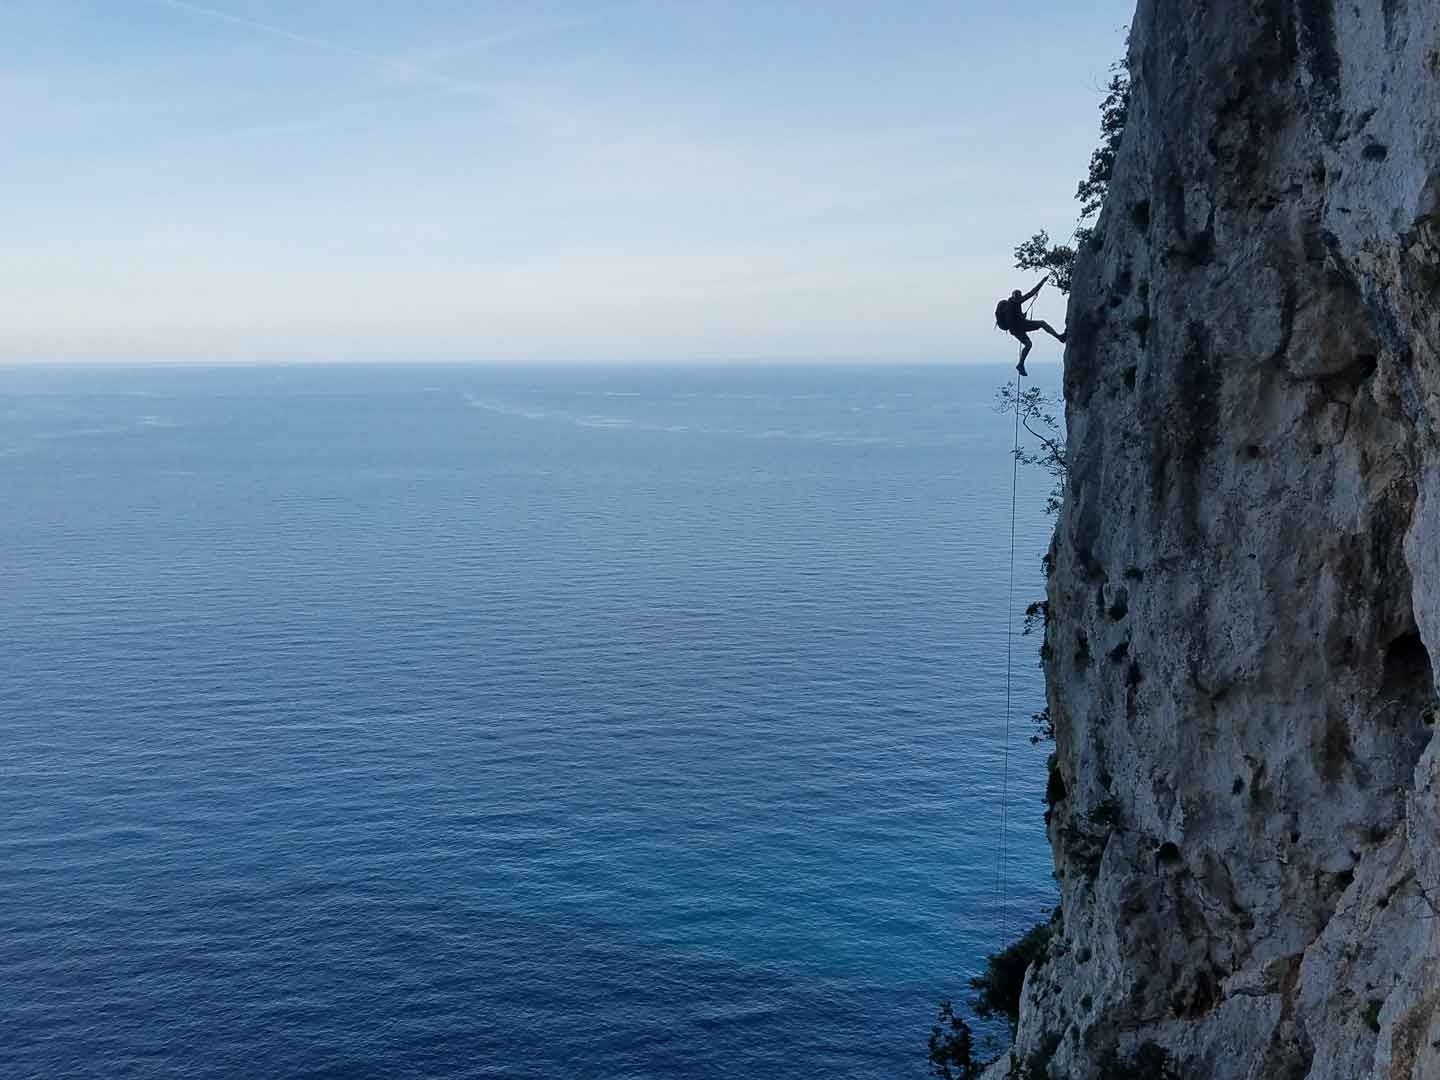 Abseiling on the Selvaggio Blu. Photo: 40 Gradi Nord.